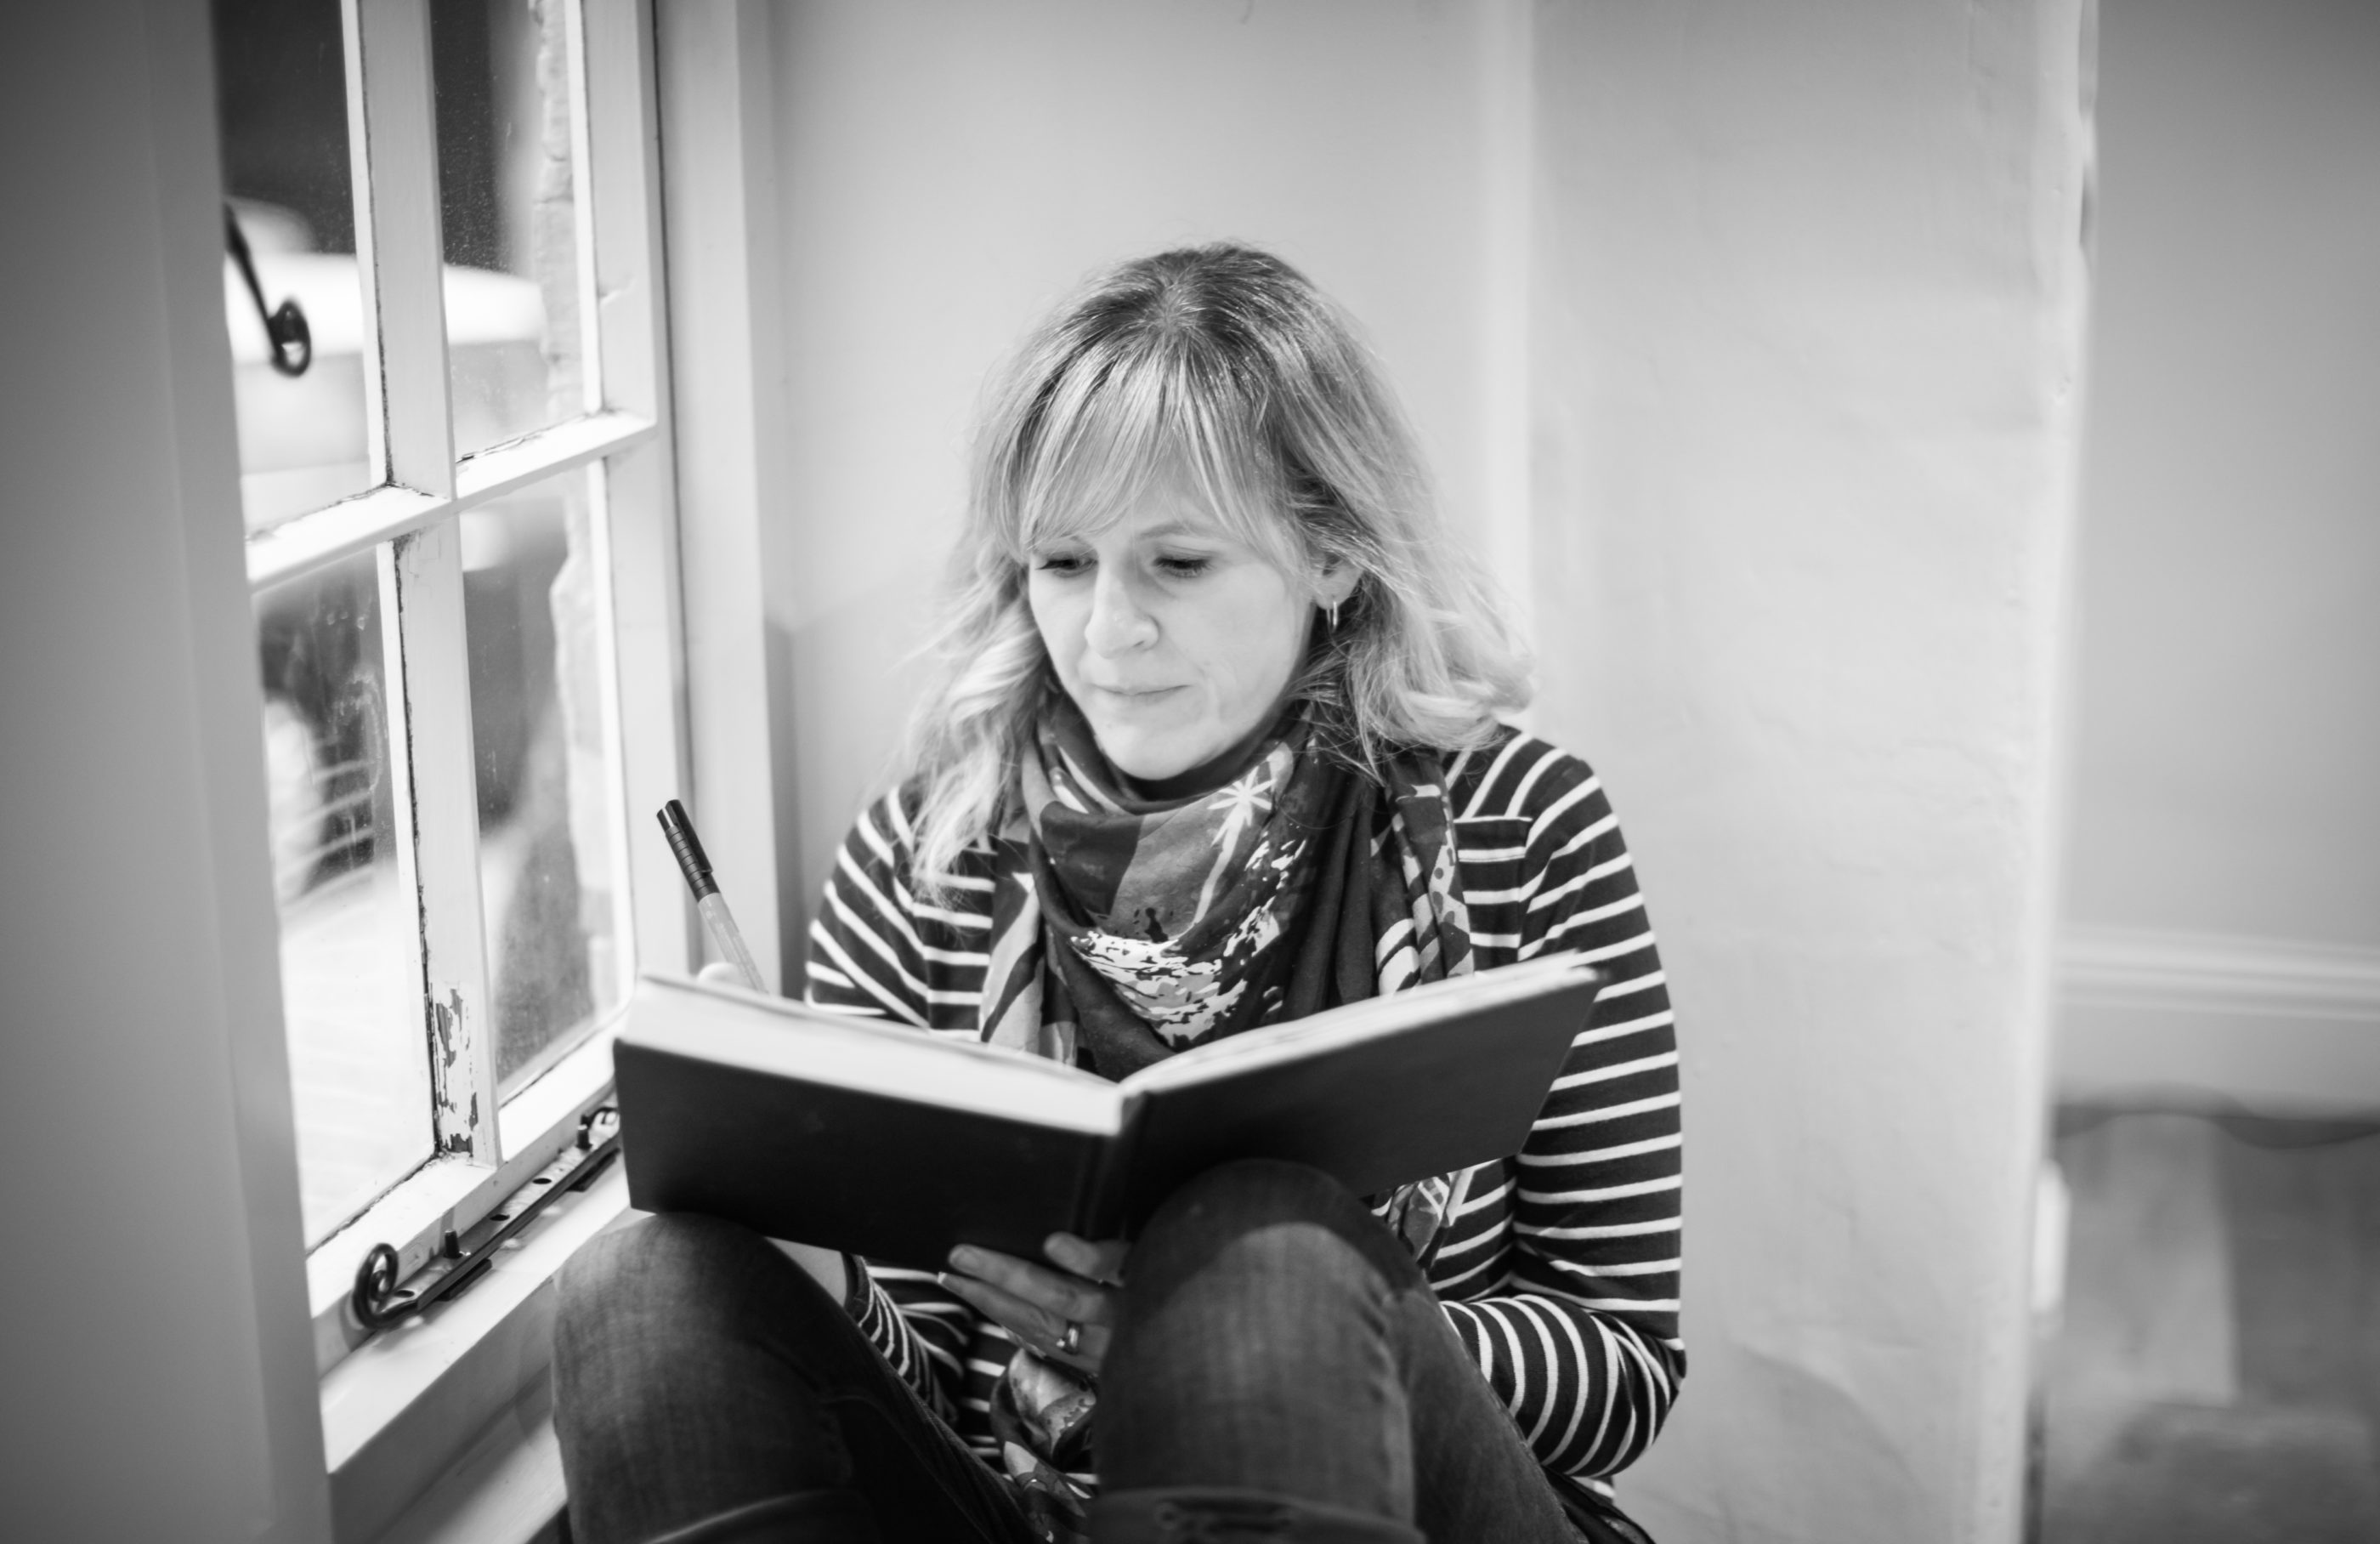 Sarah Atkins sitting in a window writing in a notebook